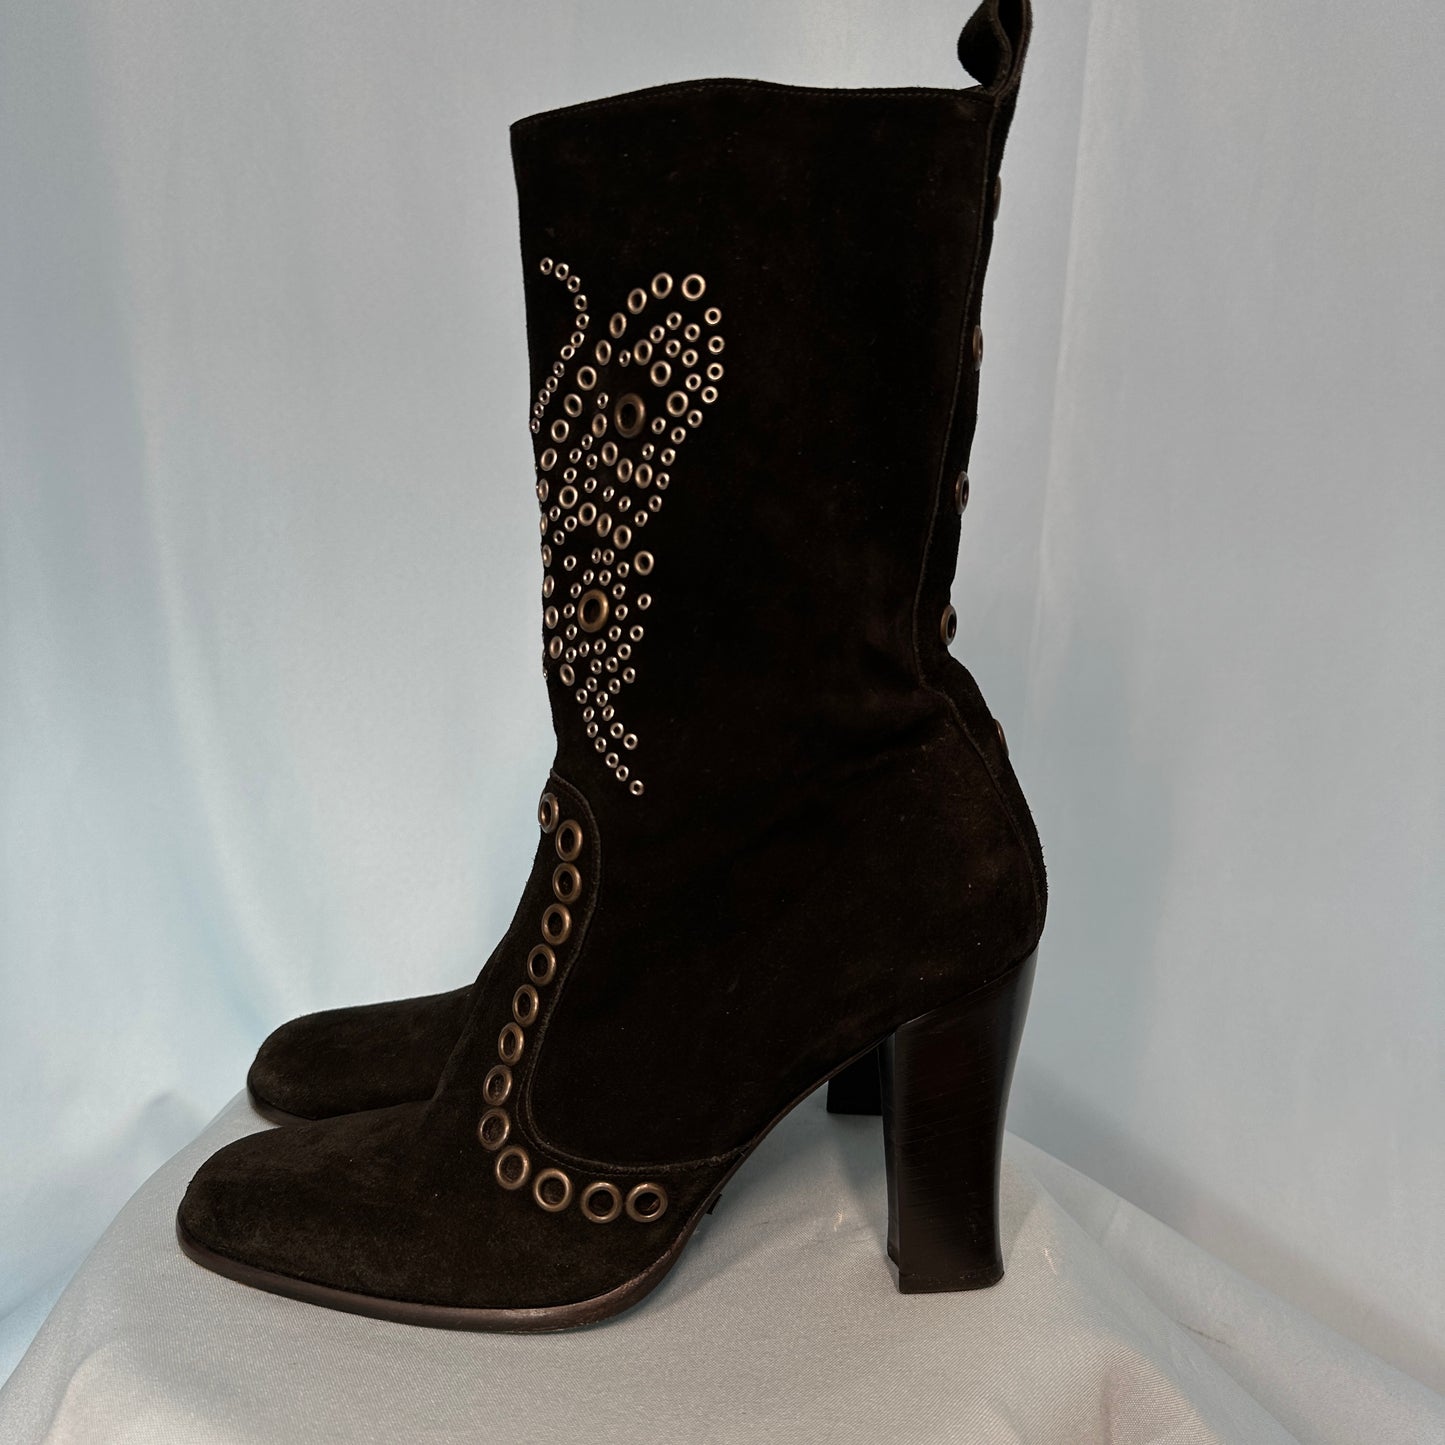 Dolce & Gabbana Butterfly Stud Black Suede Boots